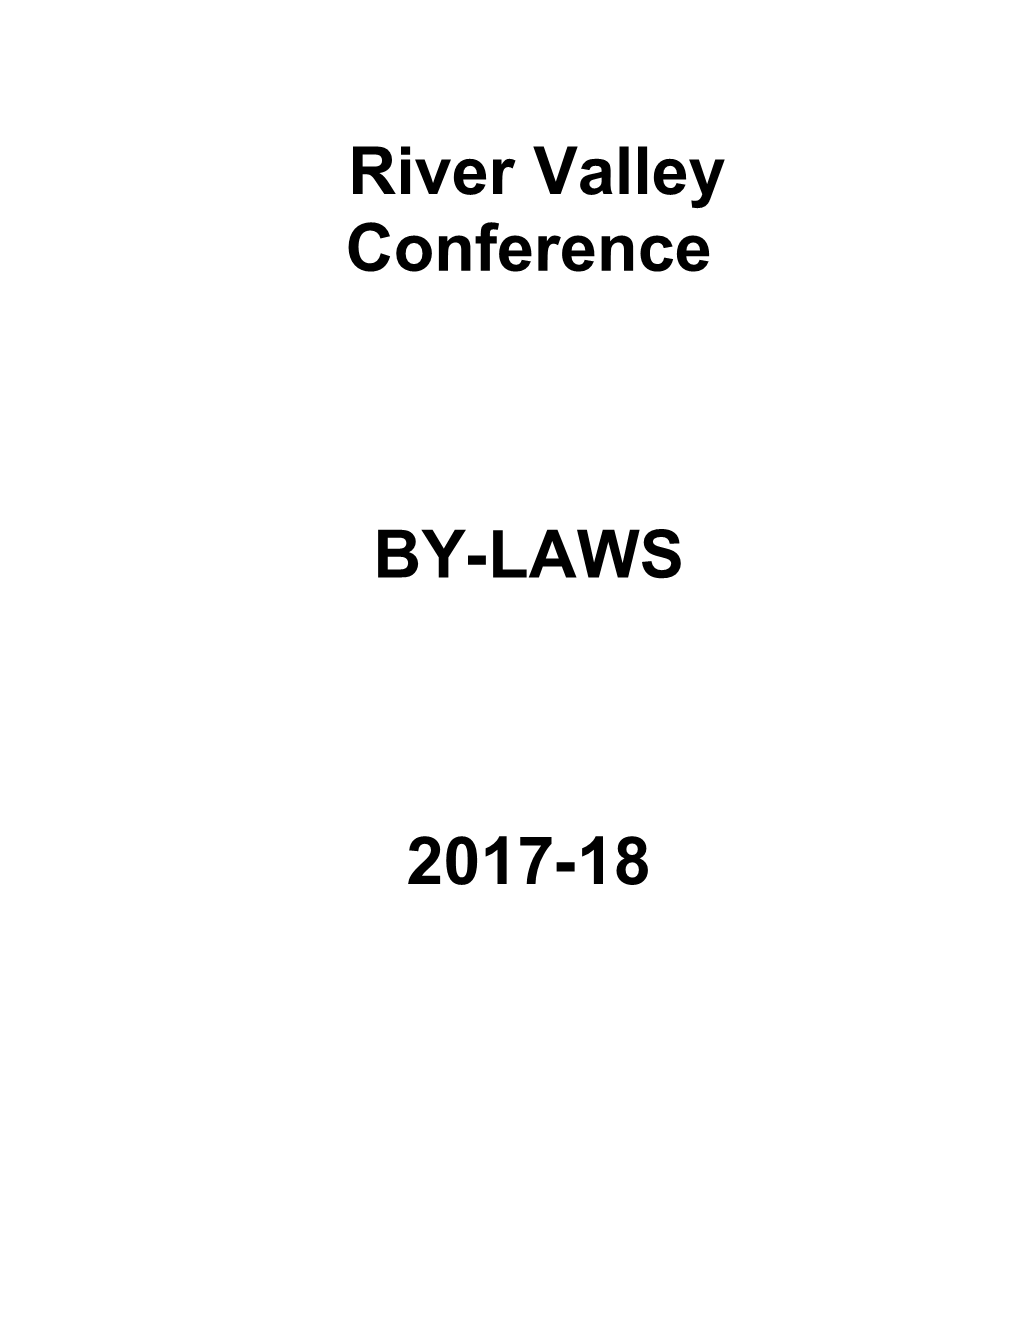 Tri-Rivers Conference